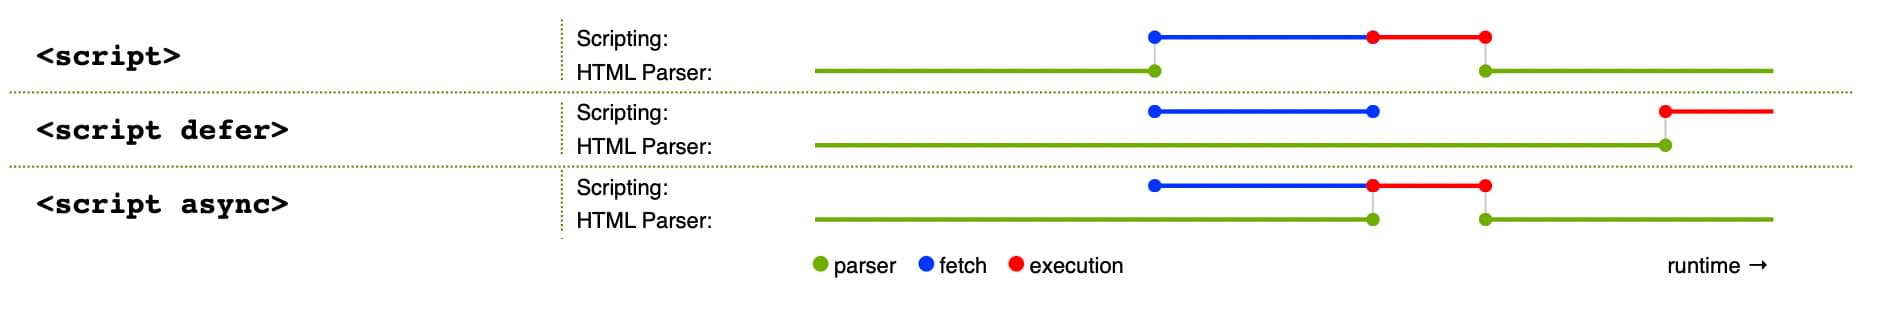 How the three script loading method work: default has parsing blocked while JavaScript is fetched and executed. With async, the parsing pauses for execution only. With defer, parsing isn